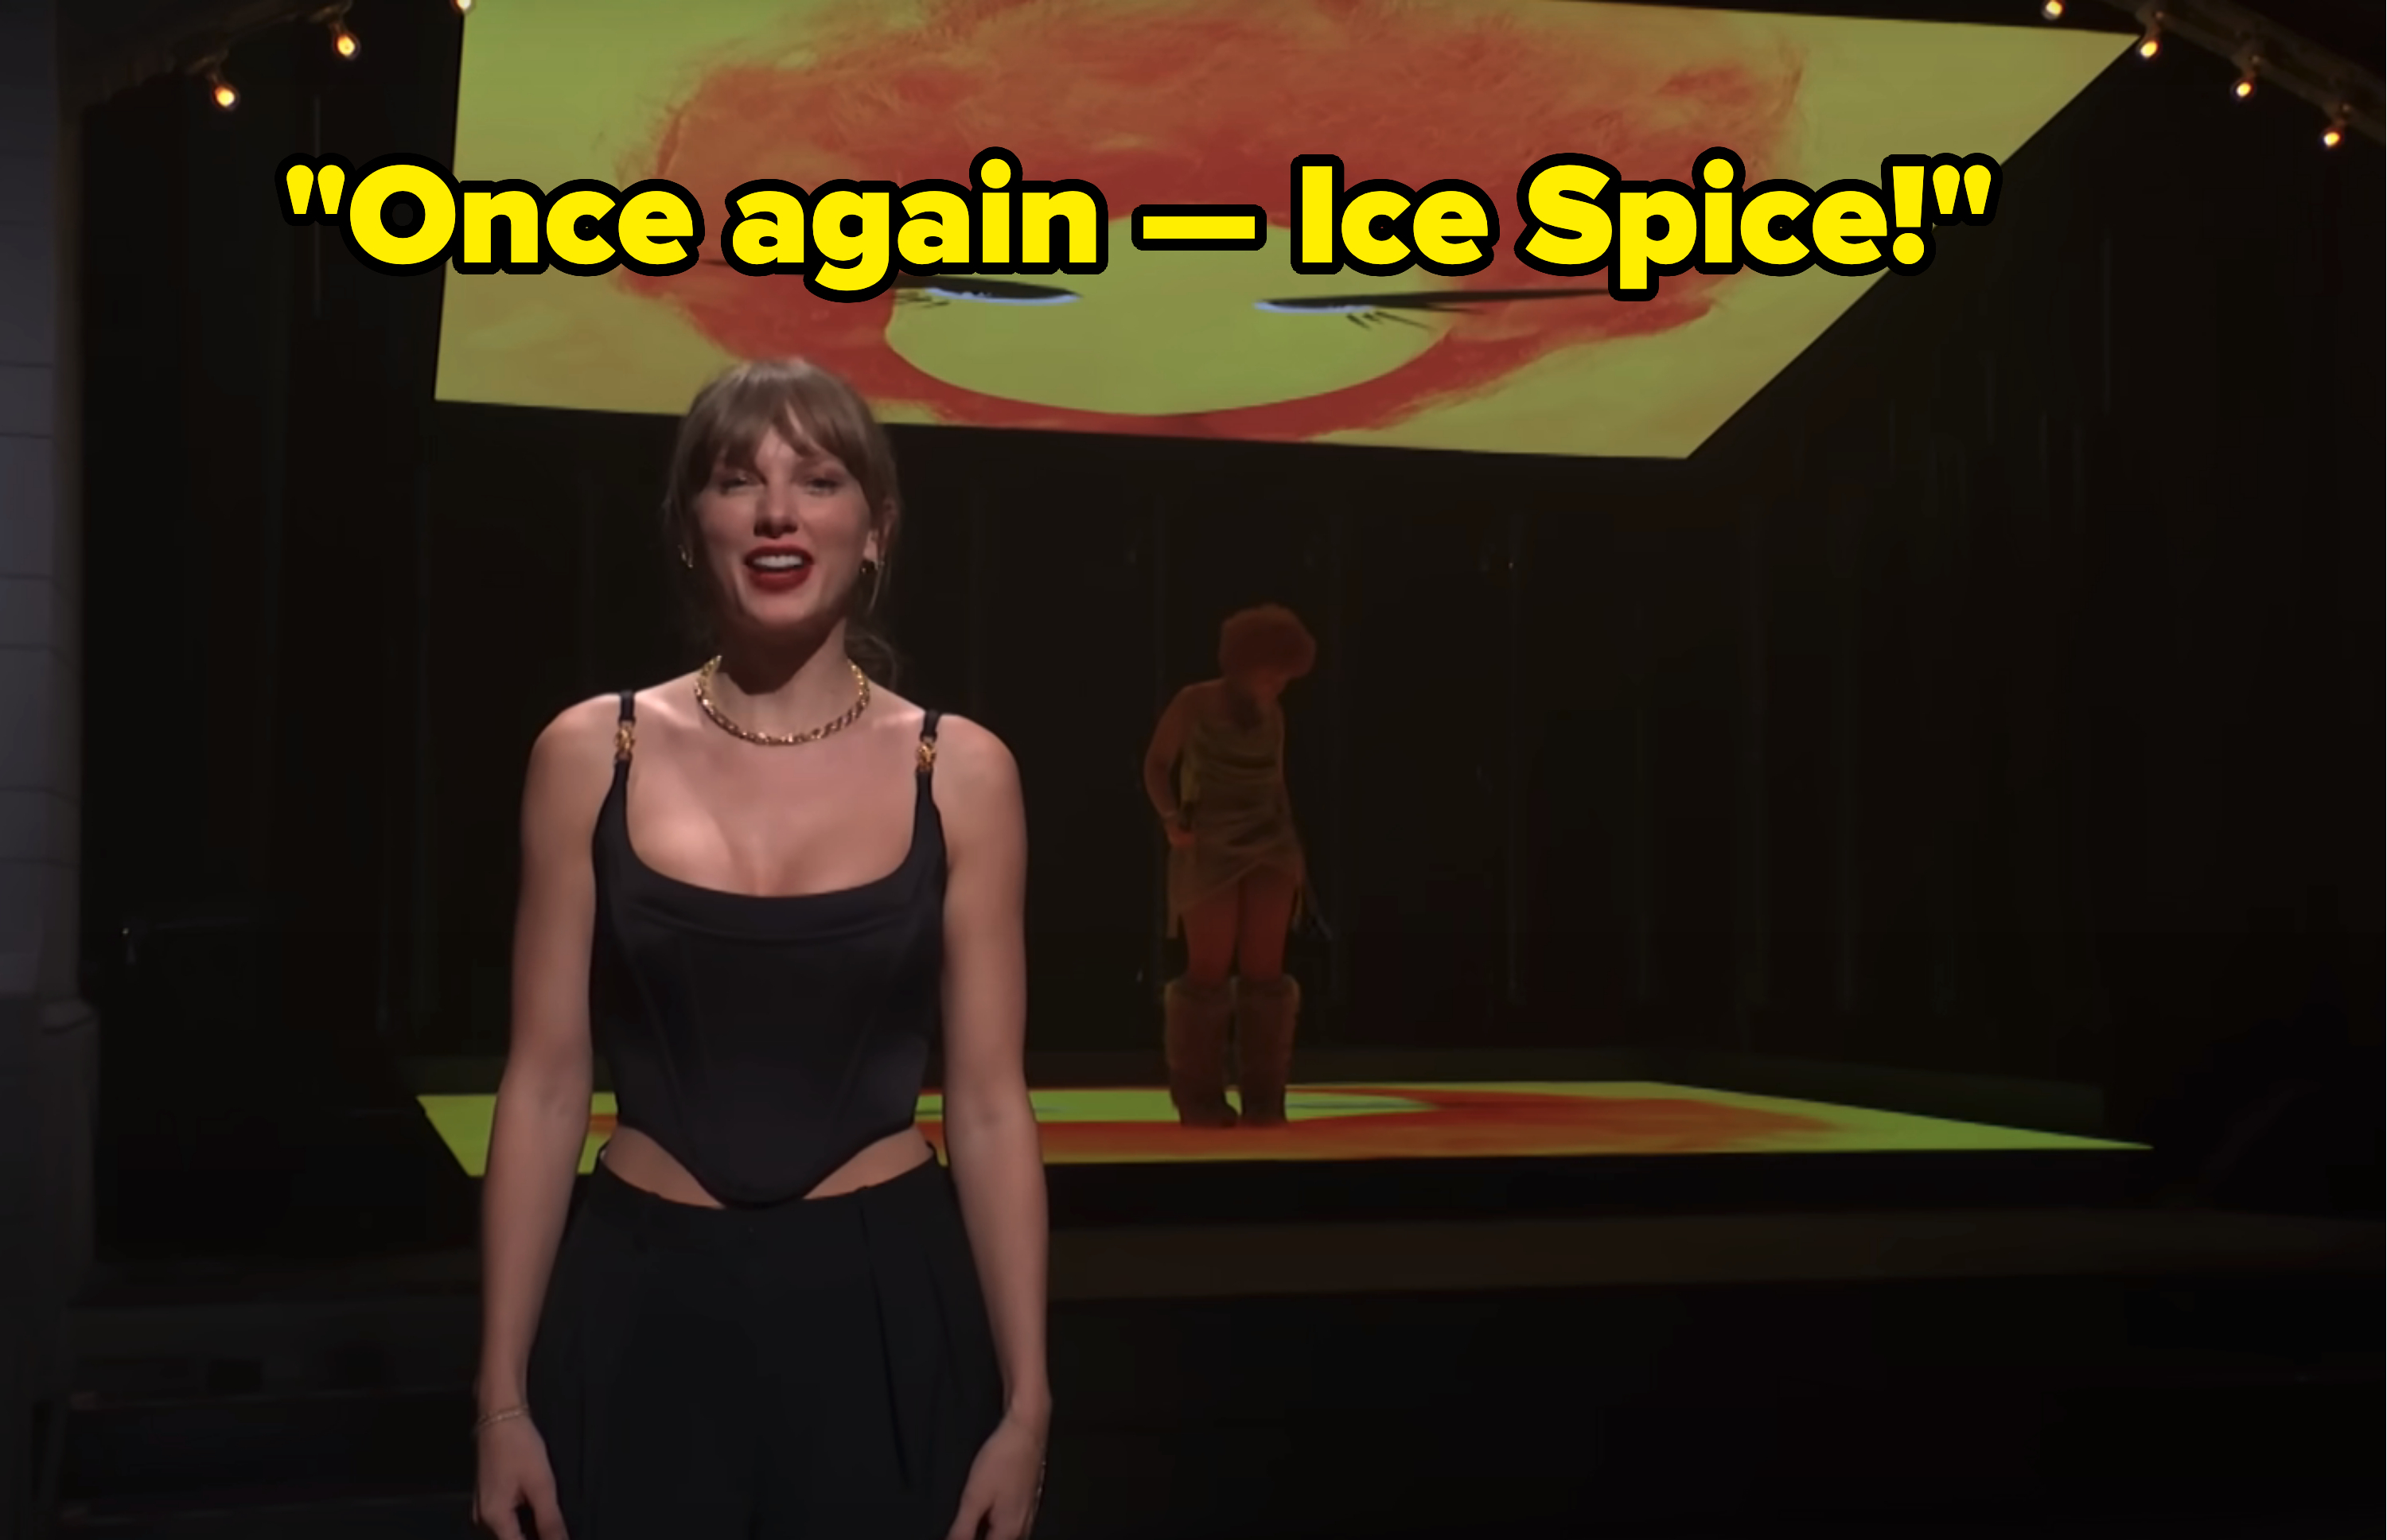 Taylor introducing Ice Spice